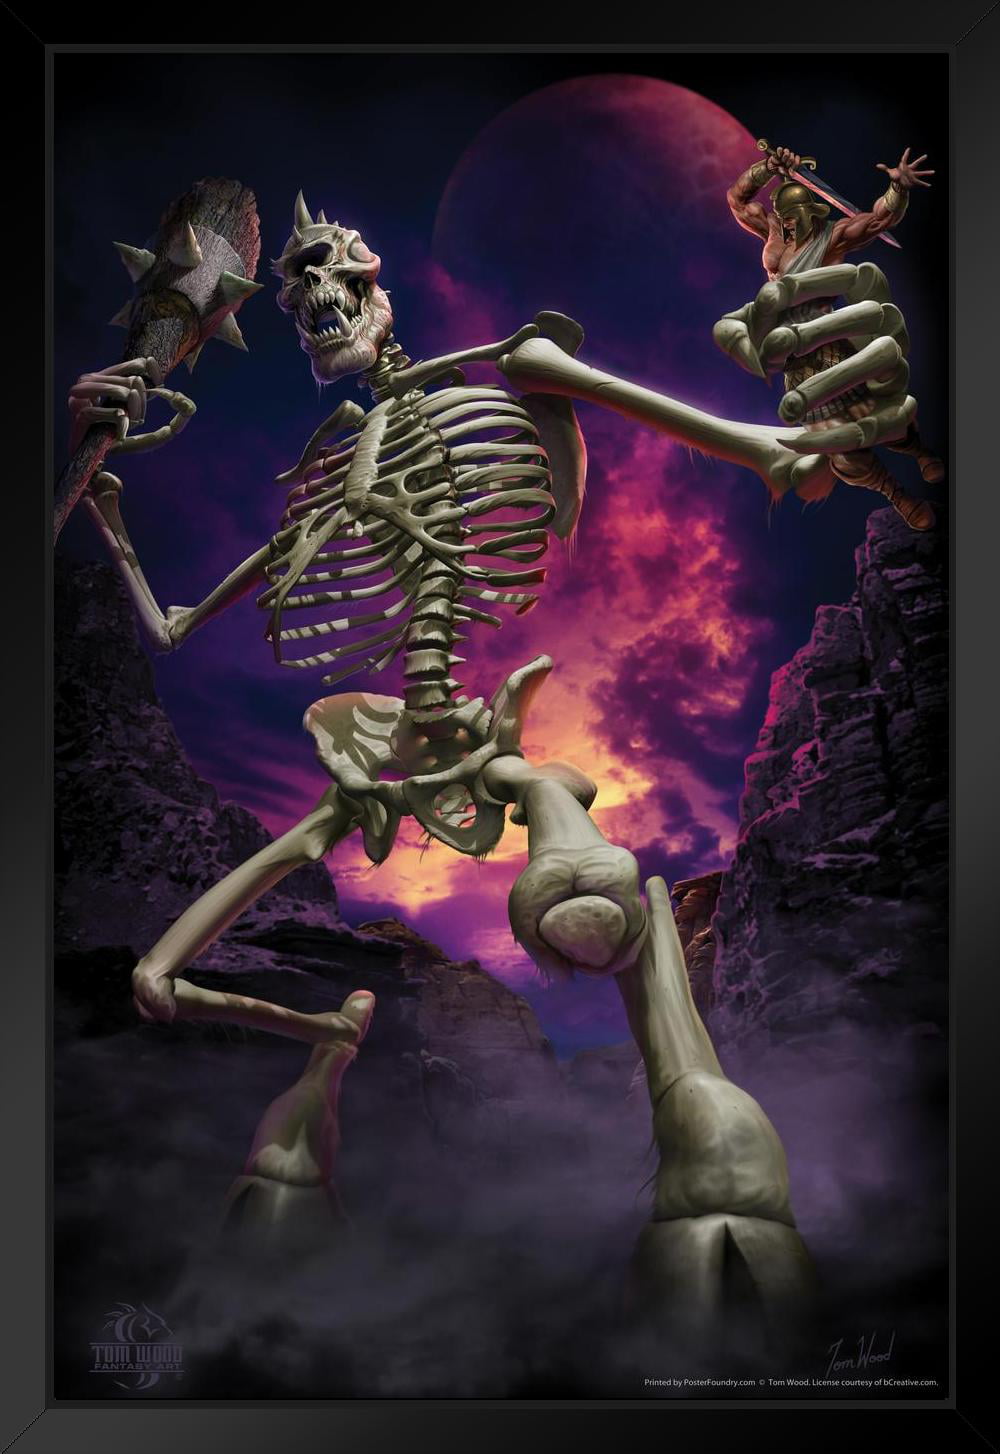 Details about   Skeleton and Raven Halloween 11x14 Unframed Art Print Great Gift Under $15 